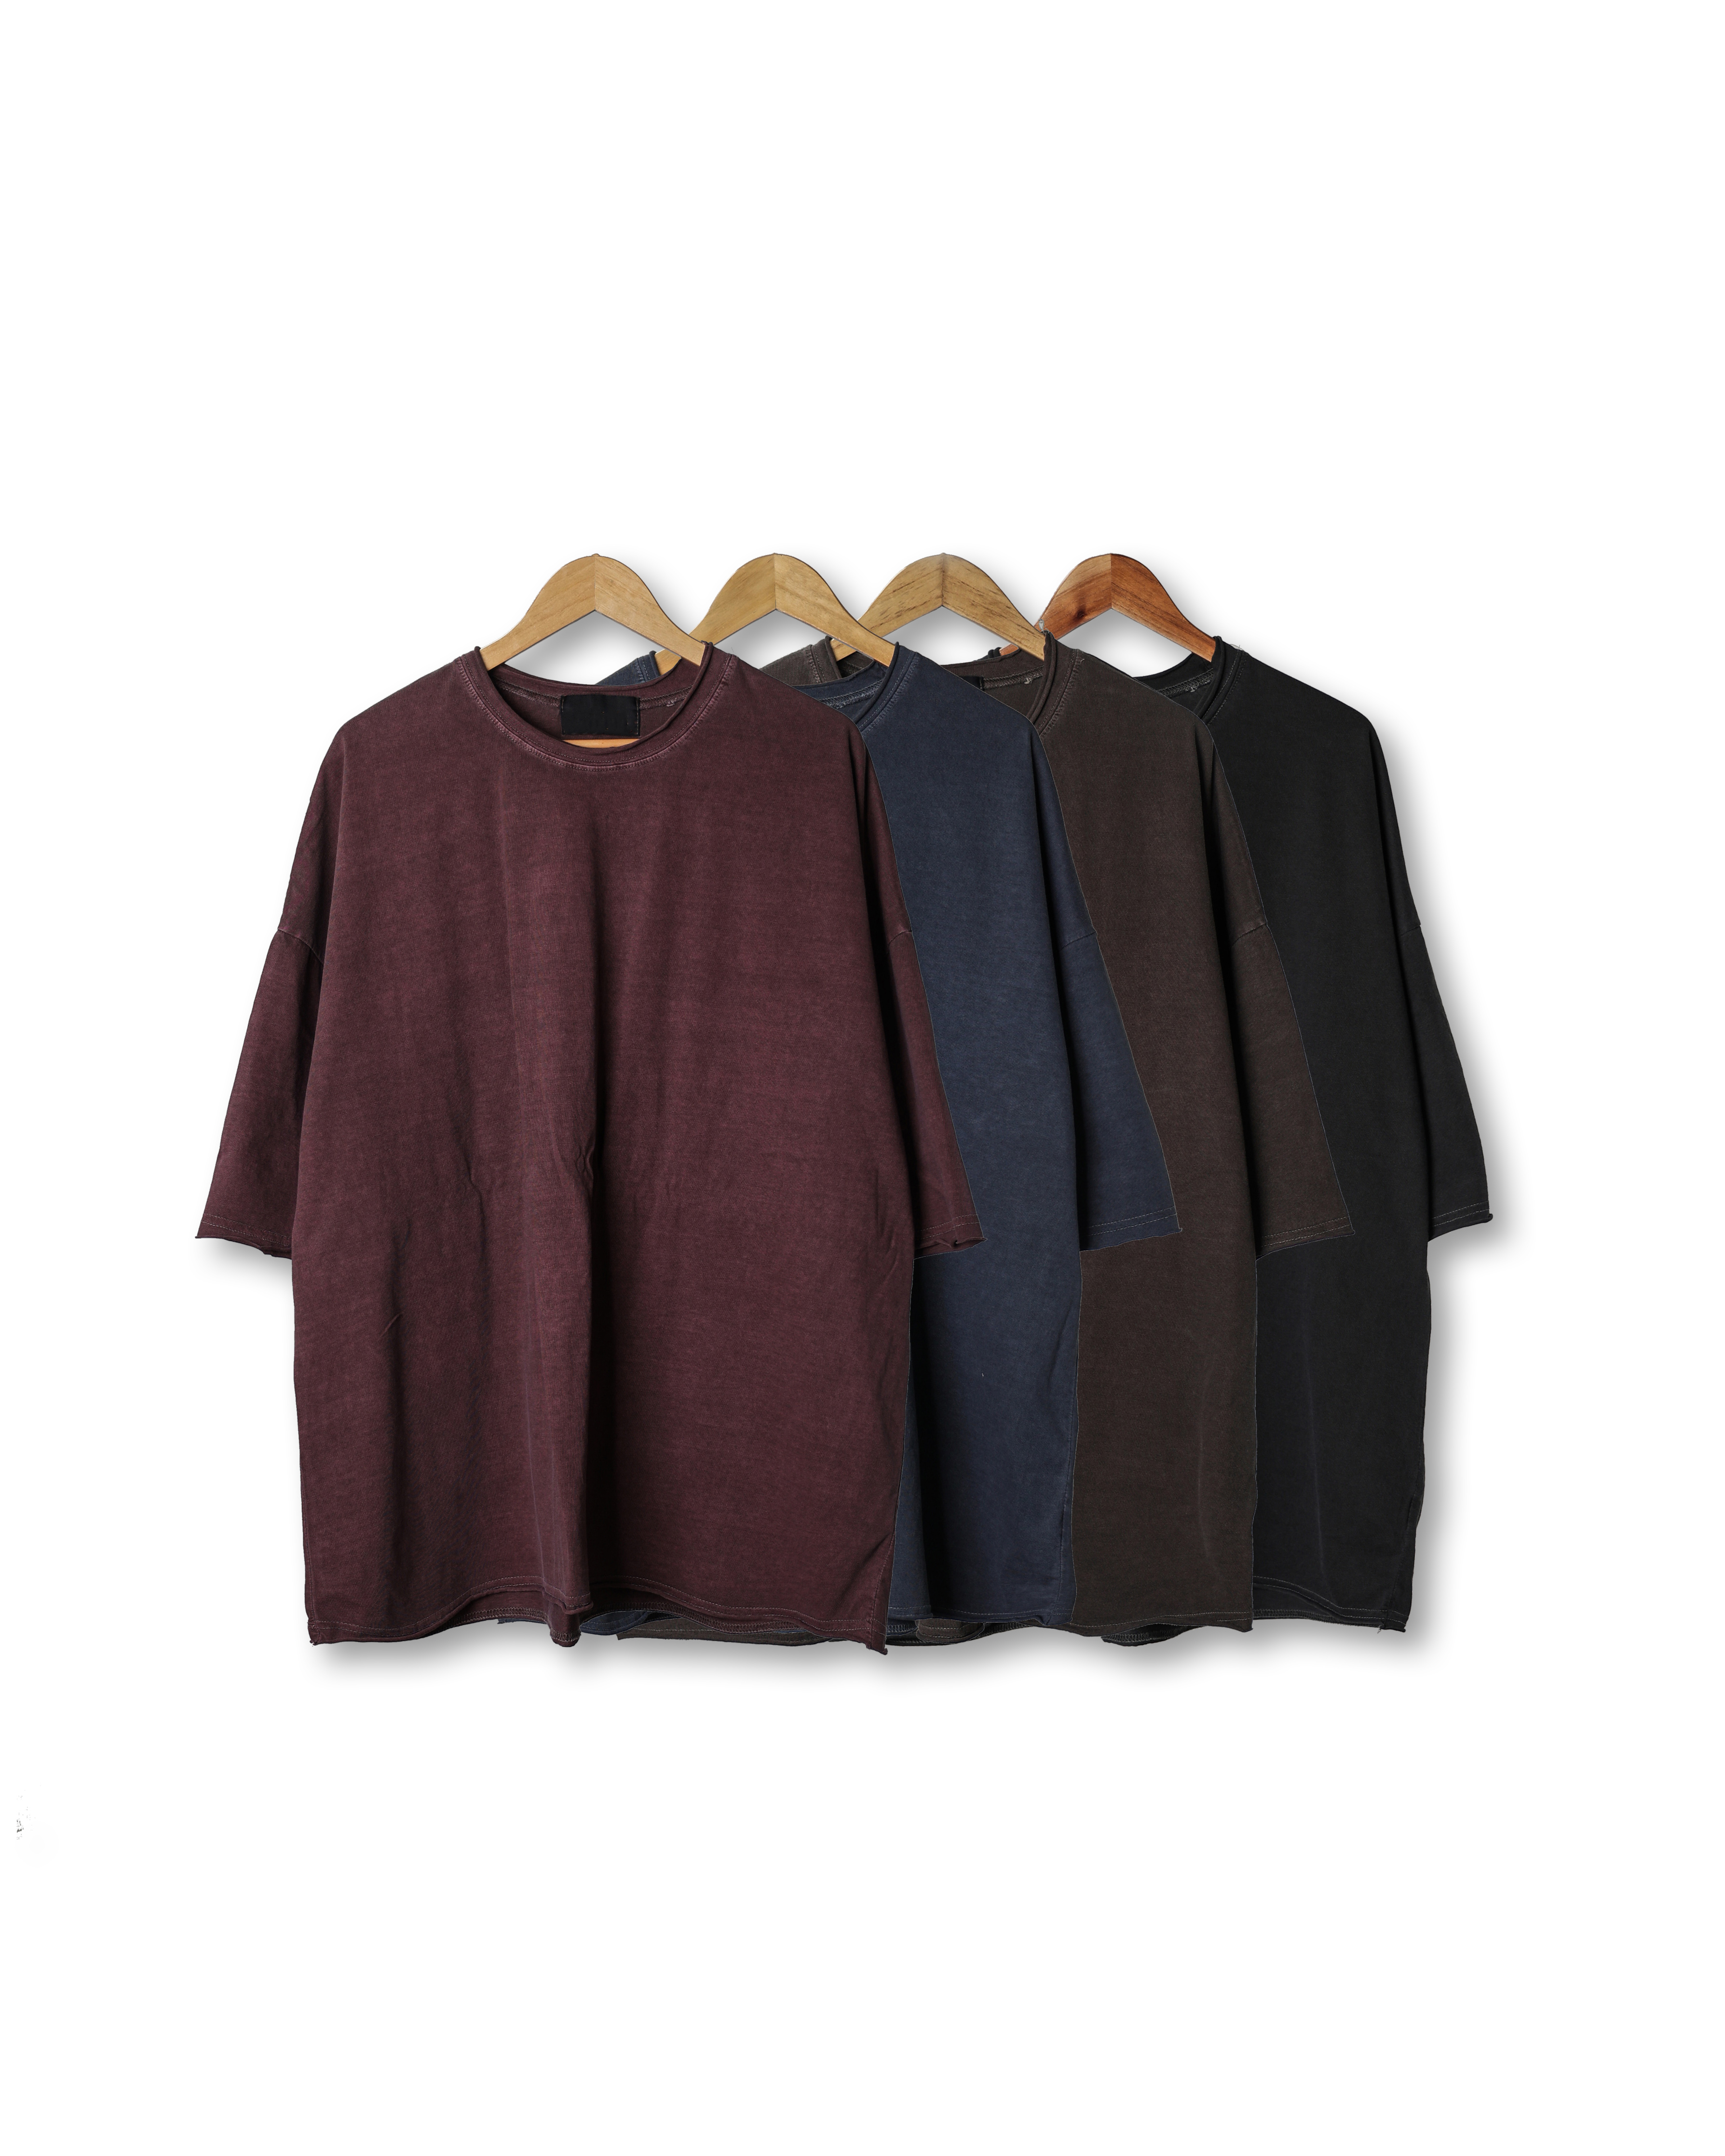 NORR Pigment Easy Cutted T Shirts (Charcoal/Navy/Brown/Wine)